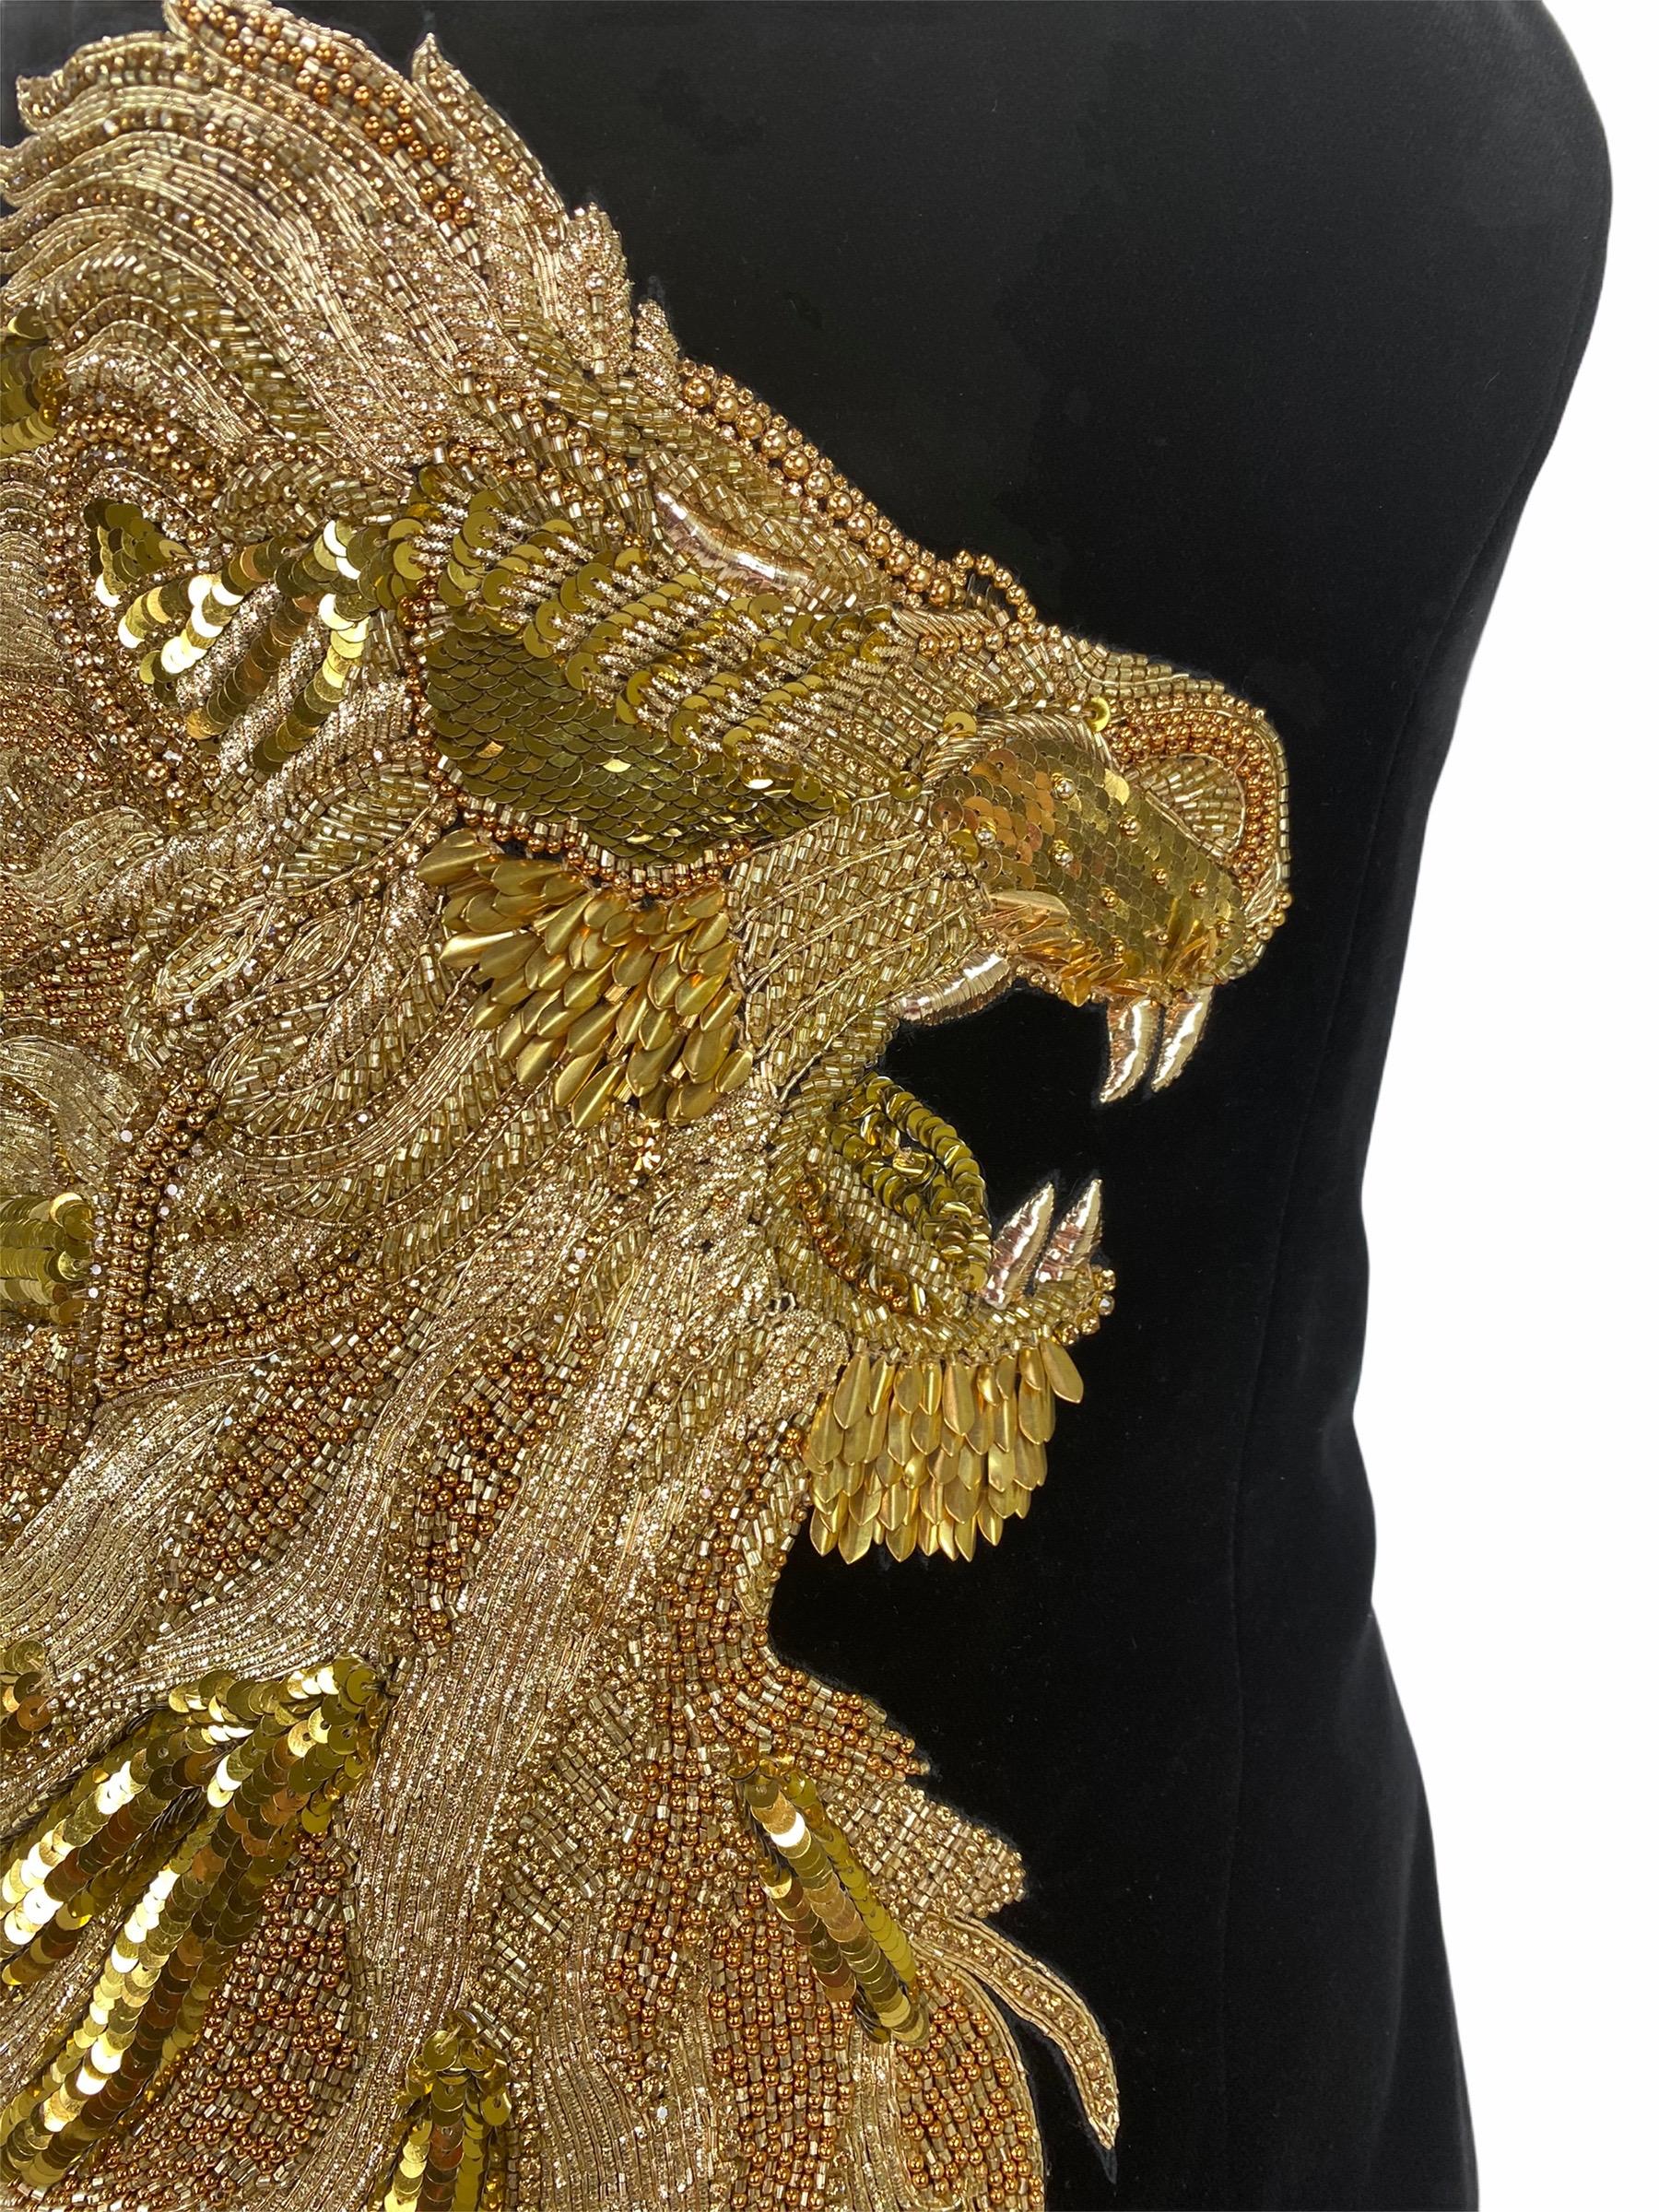 Balmain's Olivier Rousteing knows a thing or two about the perfect LBD – and with this version he takes the style to a new level. Ornately embroidered with the label's signature lion motif from sparkling gold sequins, this plush velvet dress has